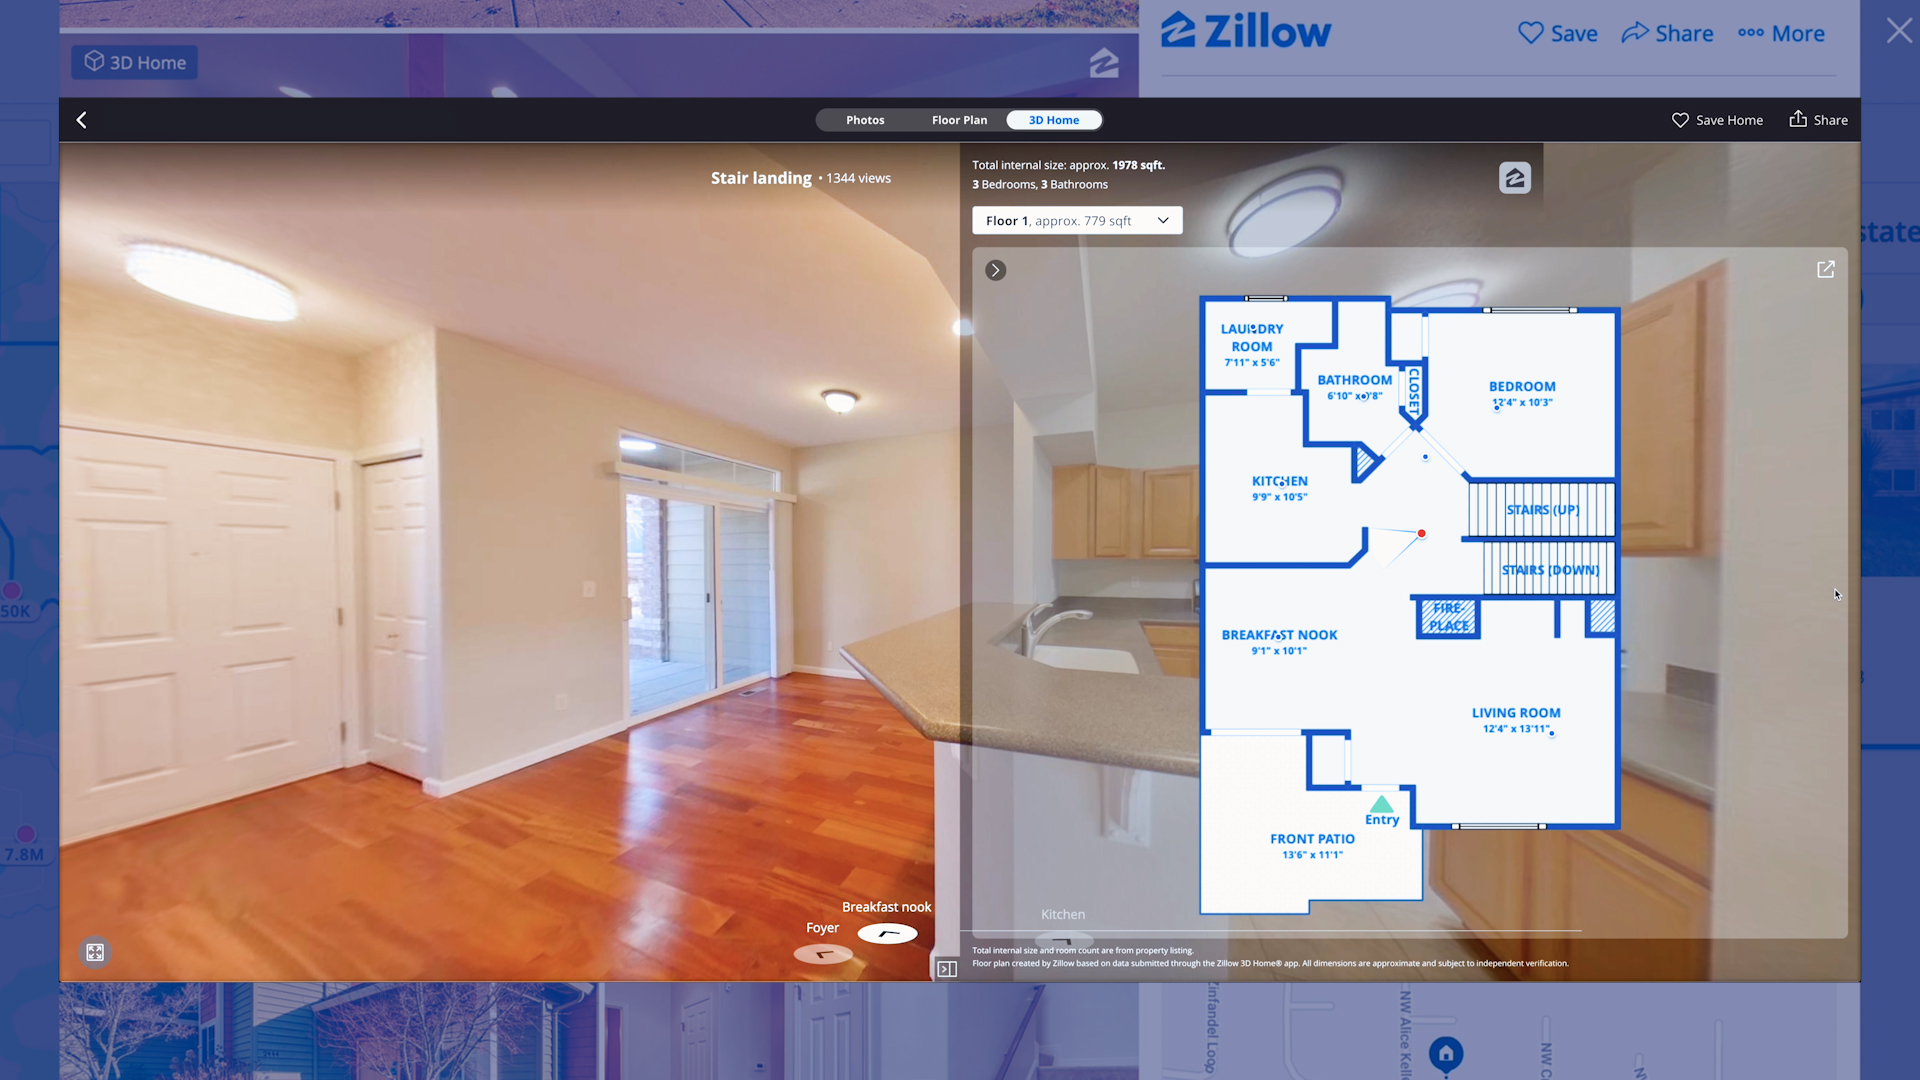 Zillow Surfing 2.0: Real estate giant uses AI to beef up virtual touring tool